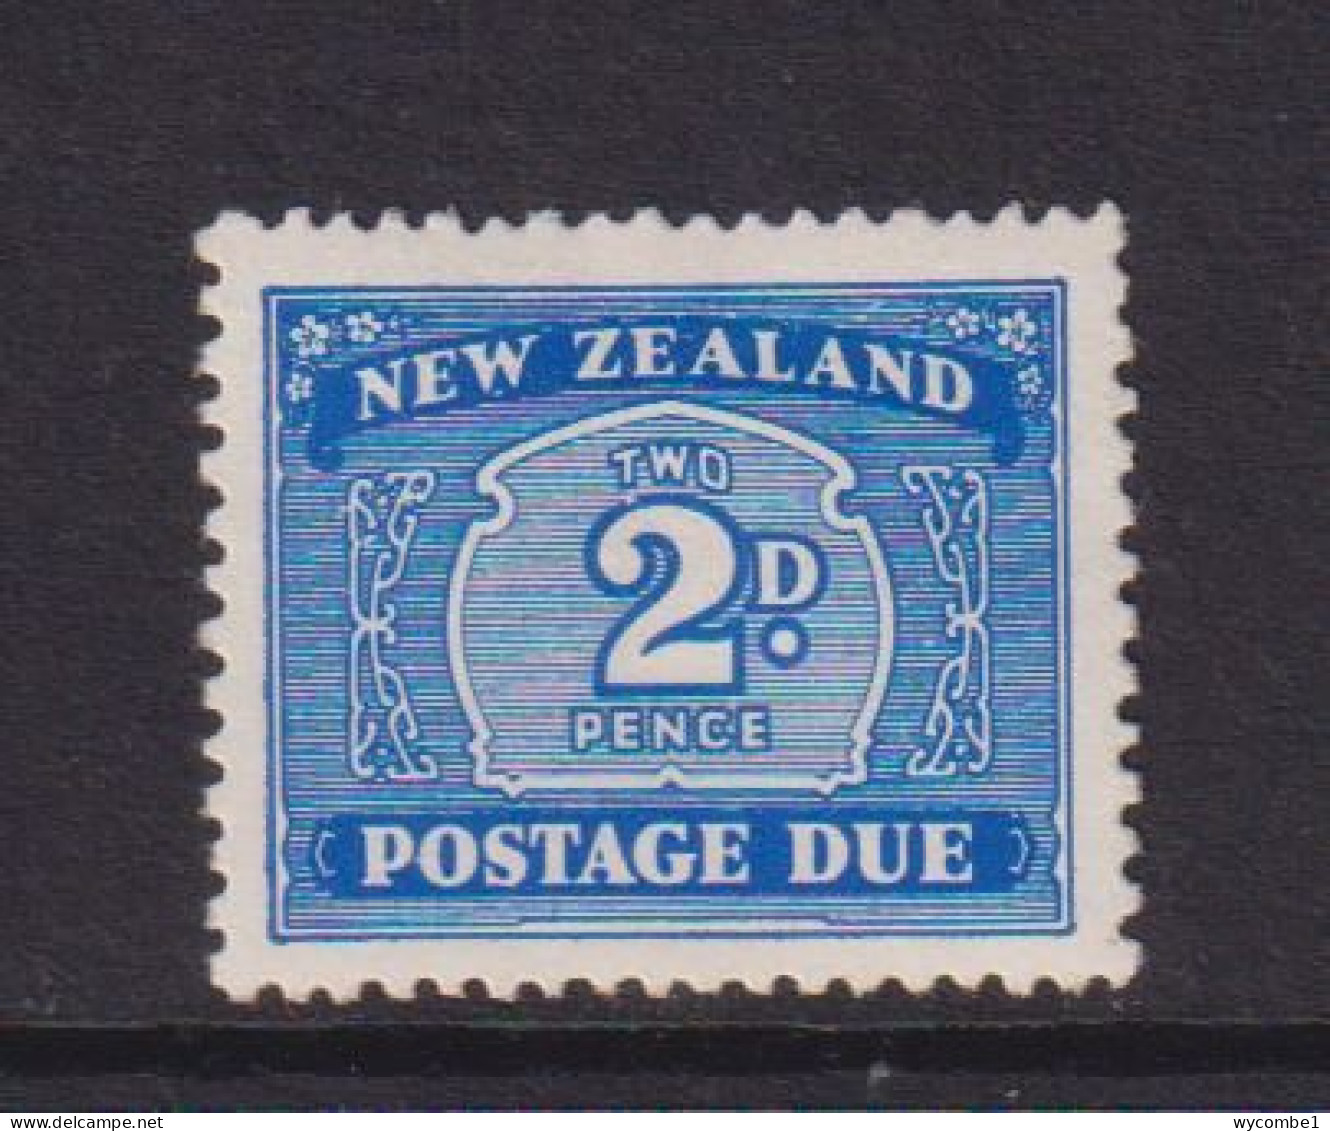 NEW ZEALAND  - 1939 Postage Due 2d Hinged Mint - Strafport